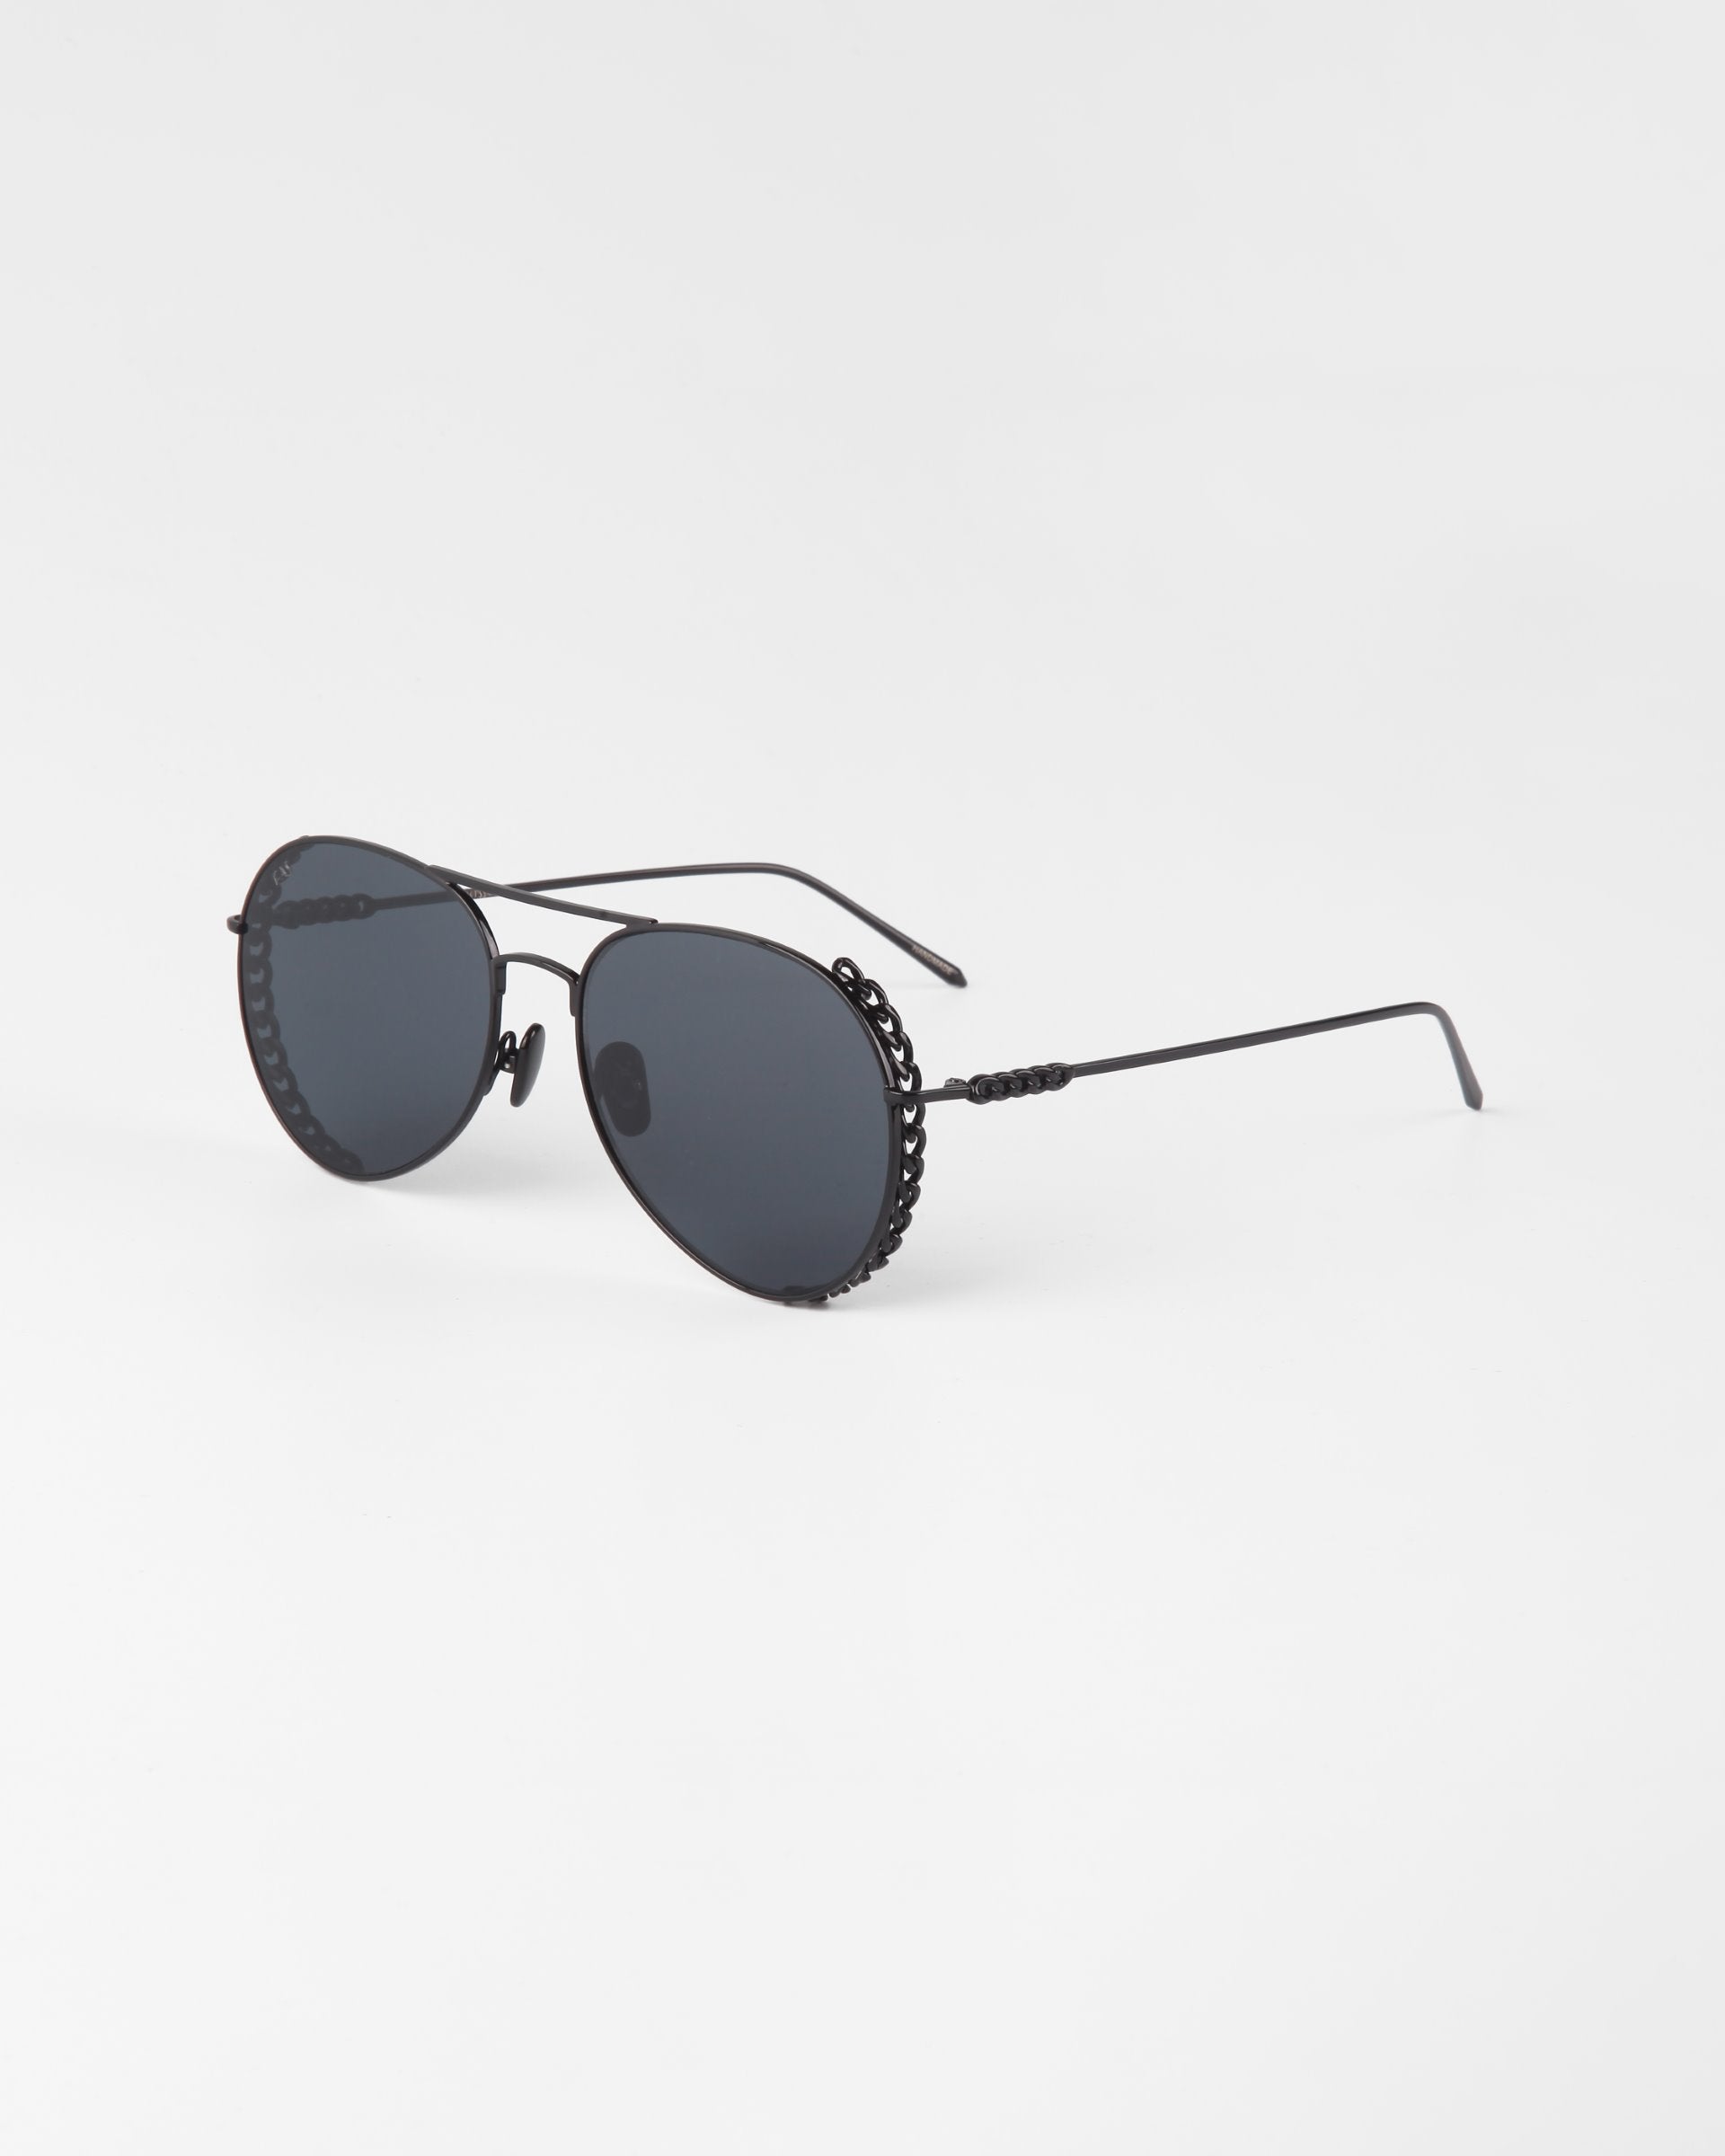 A pair of stylish black aviator sunglasses with dark nylon lenses, named Links by For Art's Sake®. The thin, gold-plated stainless steel frames are ornate, featuring intricate detailing on the sides. Placed on a plain white background and angled slightly to the left, they exude an air of elegance.